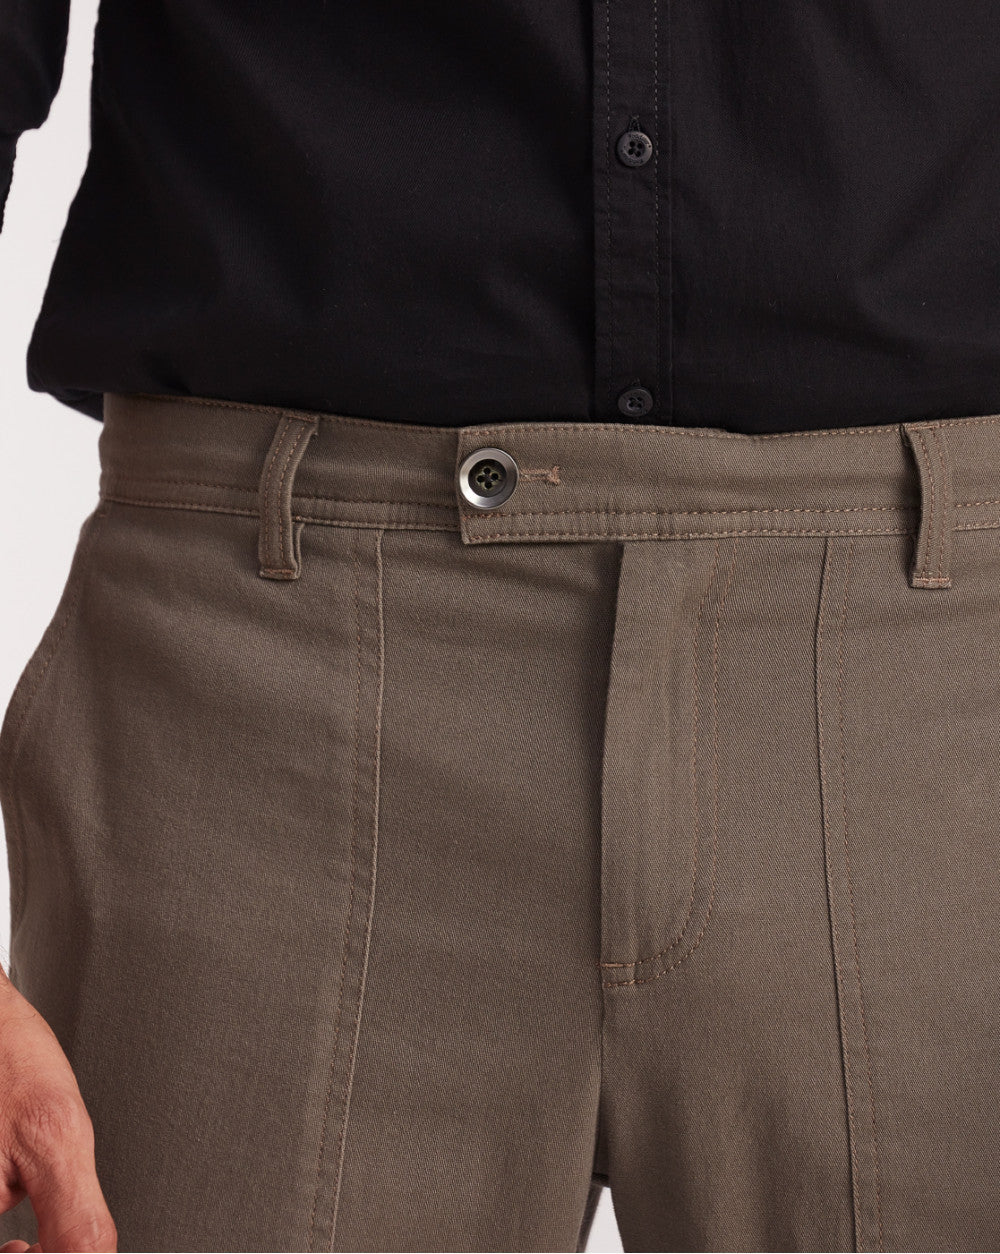 Tapered Fit Classic Cargos - Brown Oak